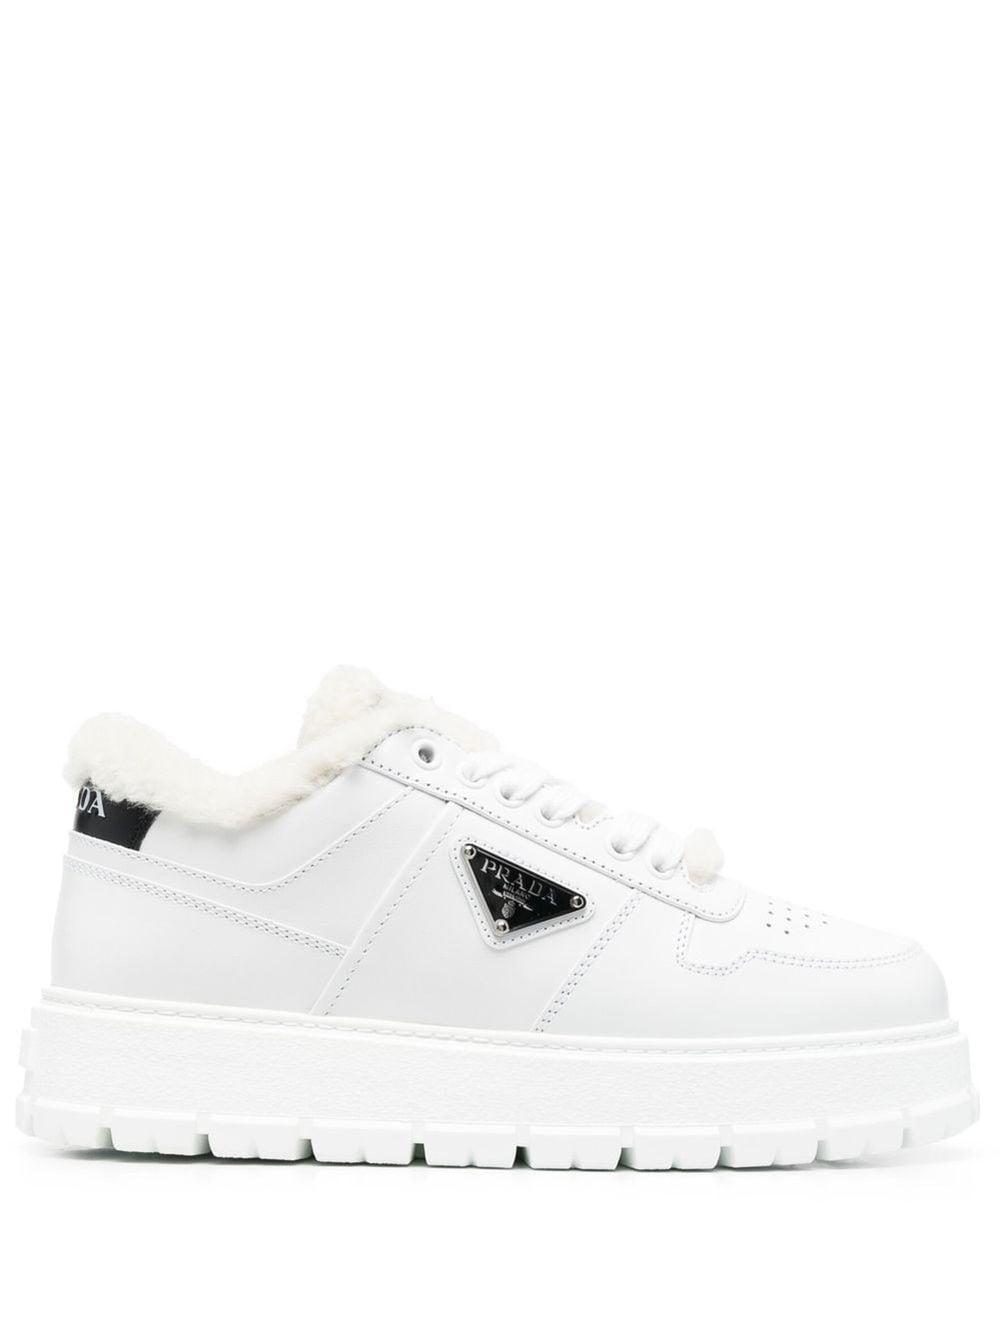 Prada Triangle-plaque Low-top Sneakers in White | Lyst